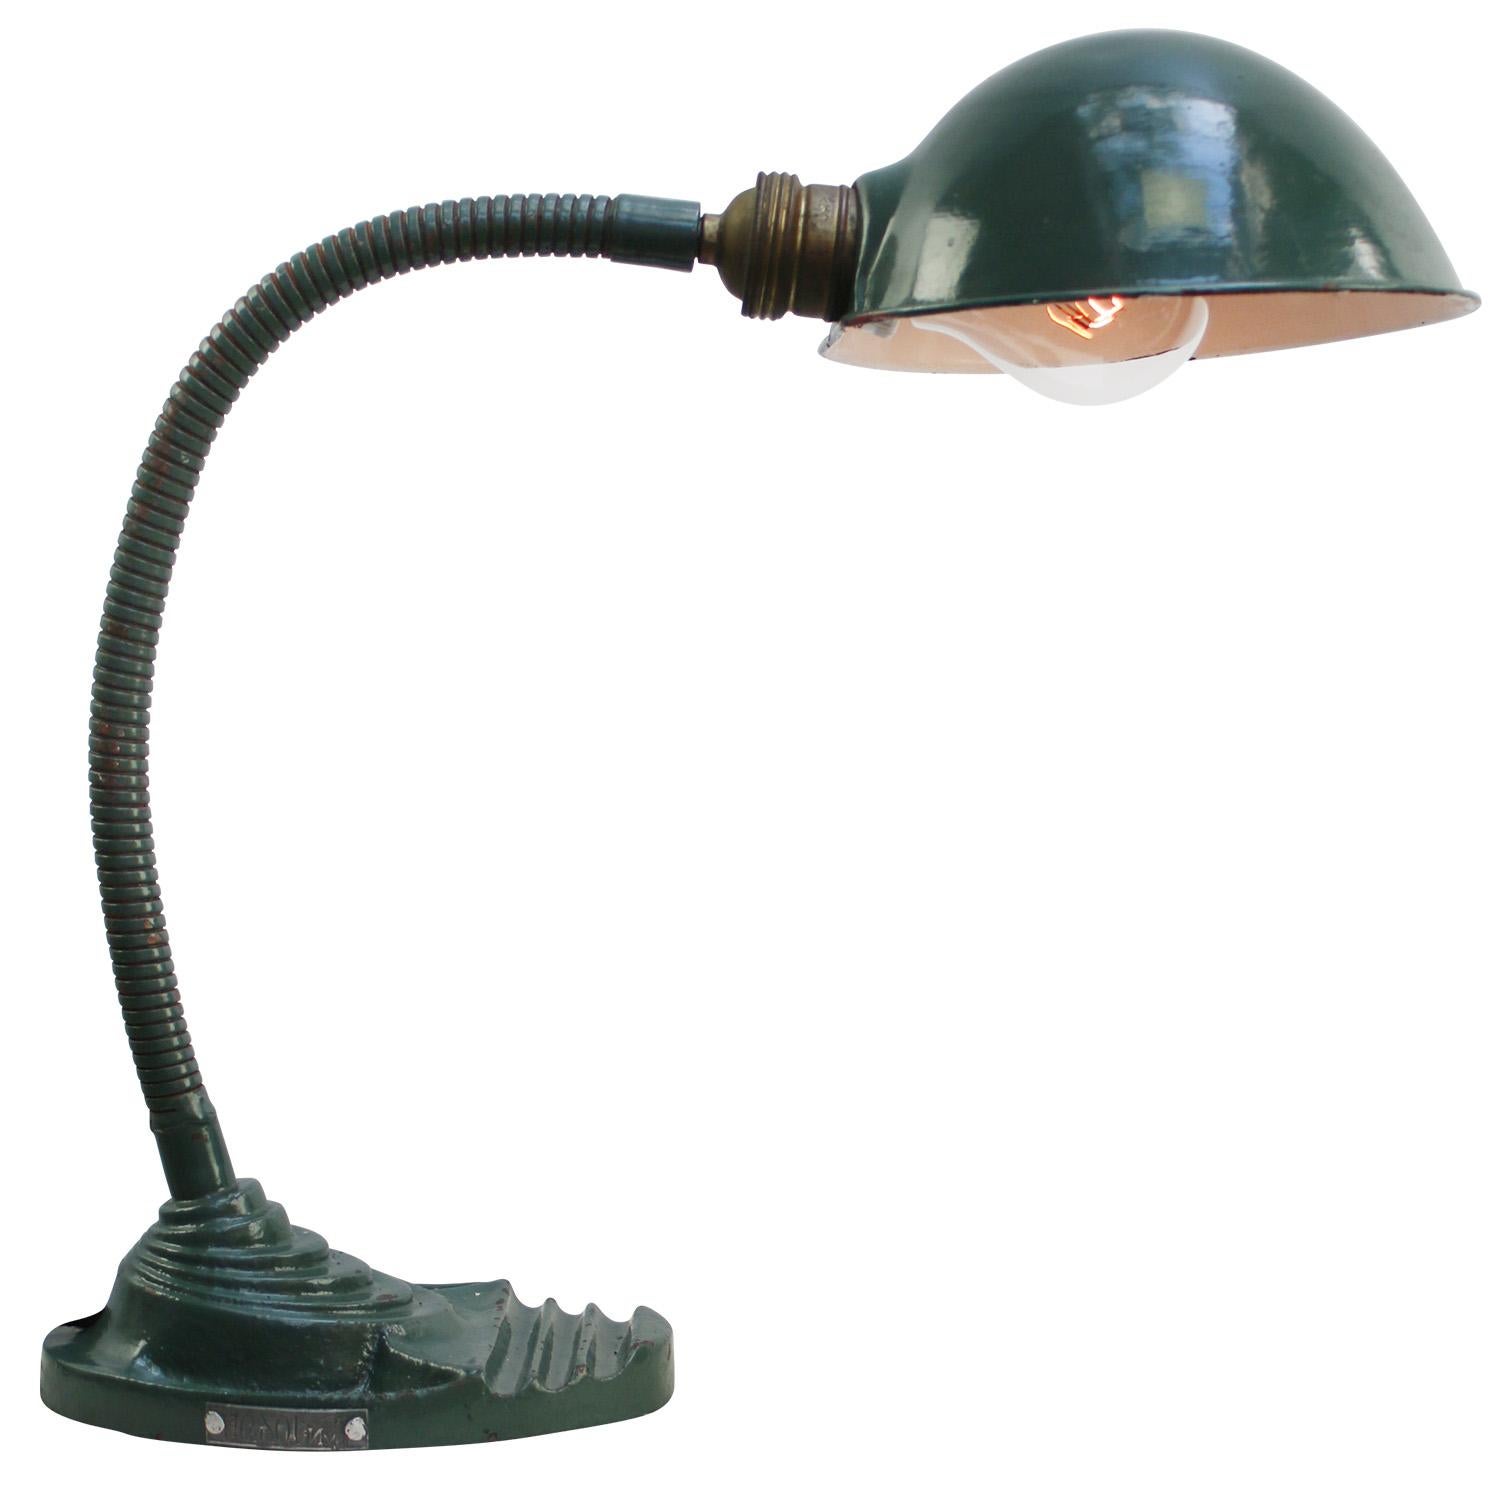 Green Belgian goose neck desk light by Erpe Belgium
Flexible Gooseneck arm with metal shade.
Green cast iron base. 
2.5 meter black cotton flex, plug and switch 

Available with US/UK plug

Weight: 1.70 kg / 3.7 lb

Priced per individual item. All